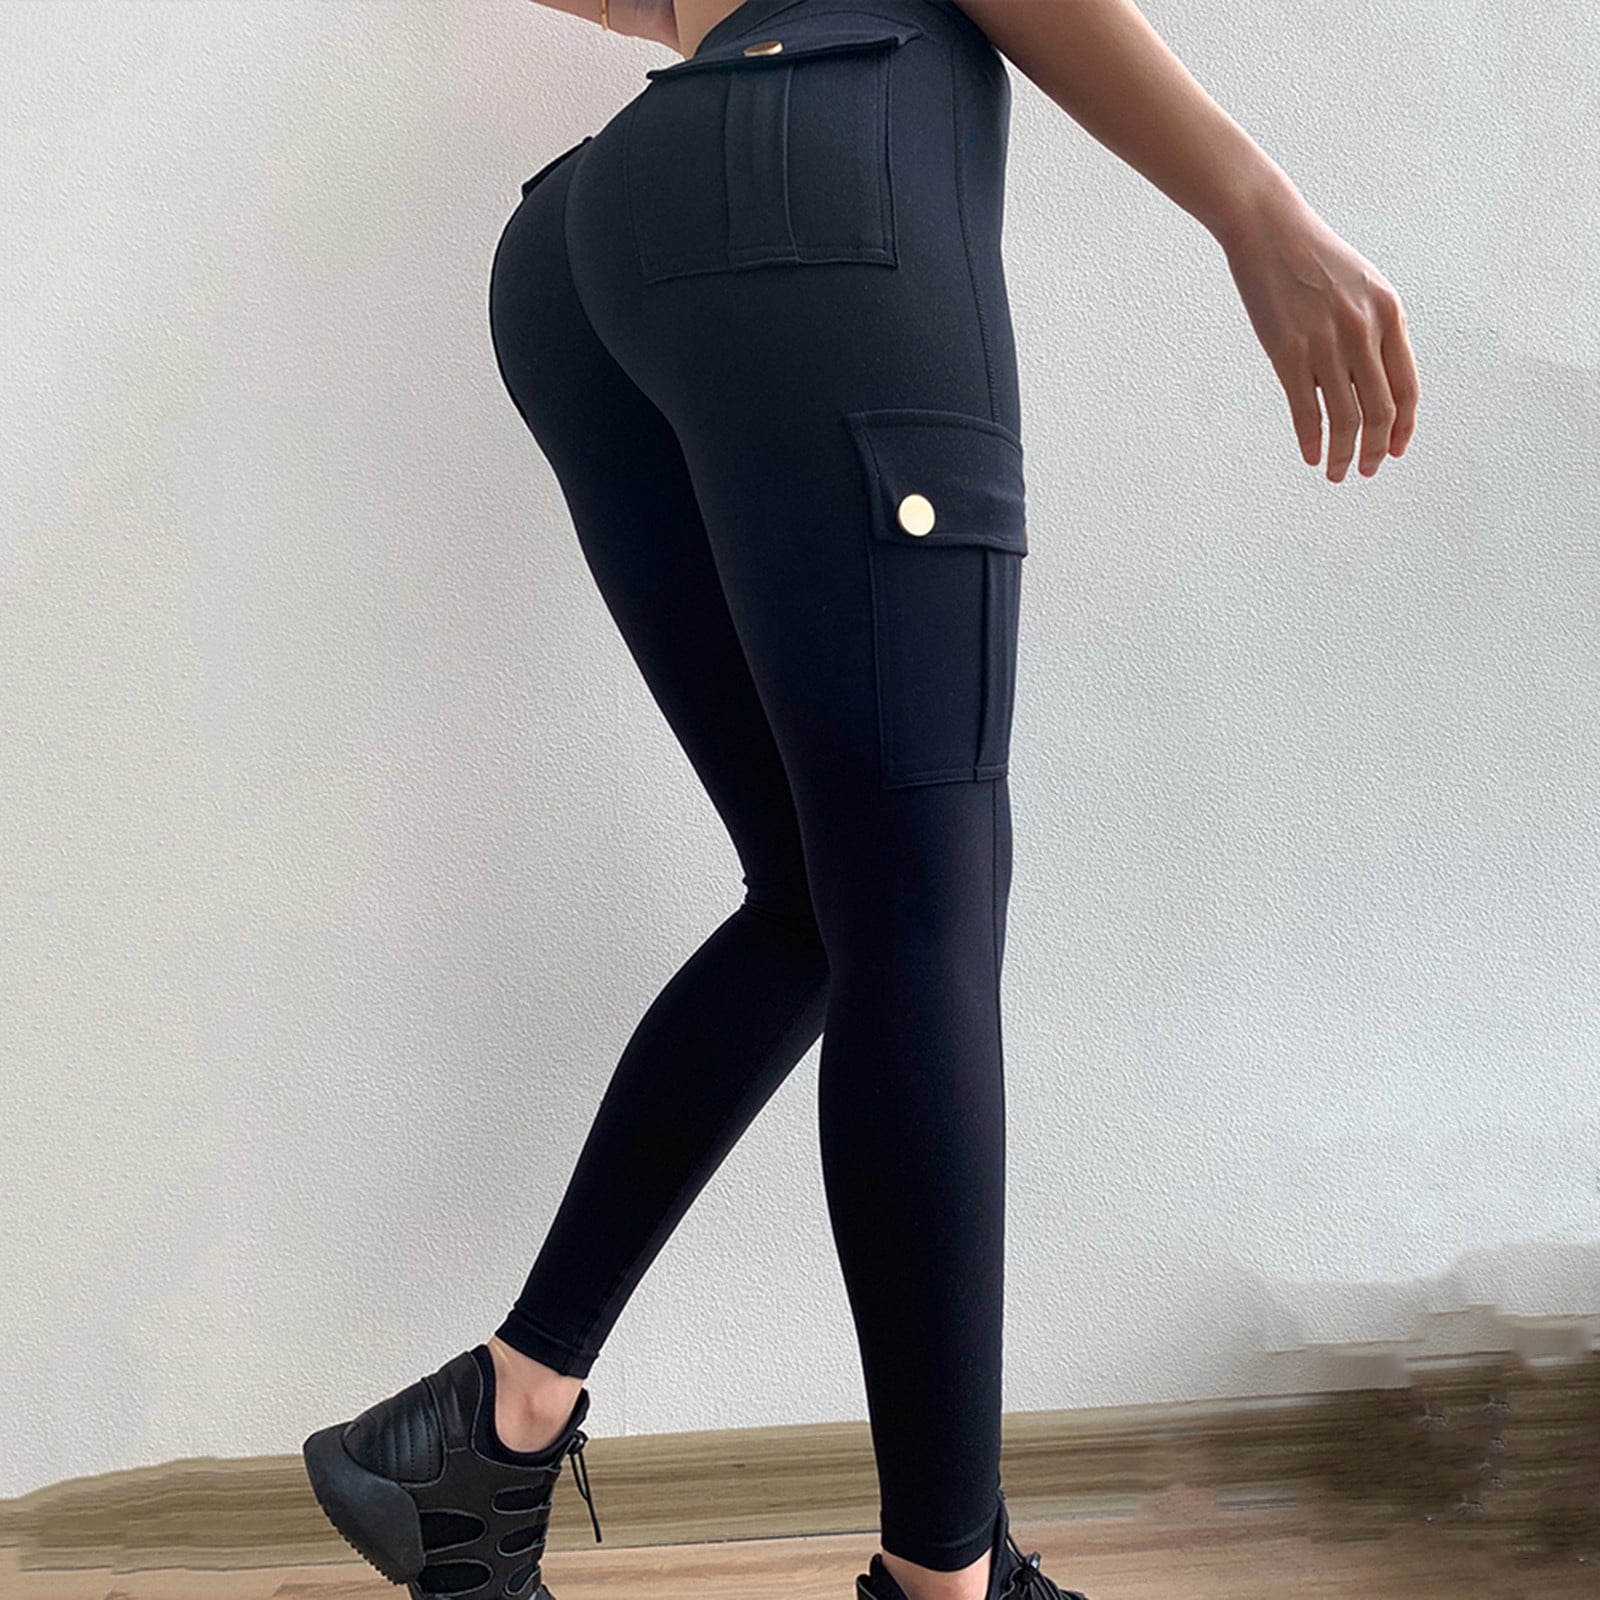 Honeeladyy Pants For Women Loose Multi Pockets Stretchy Yoga Fitness Pants  Women's Tight-fitting Attractive Sports Pants High-waist Quick-drying